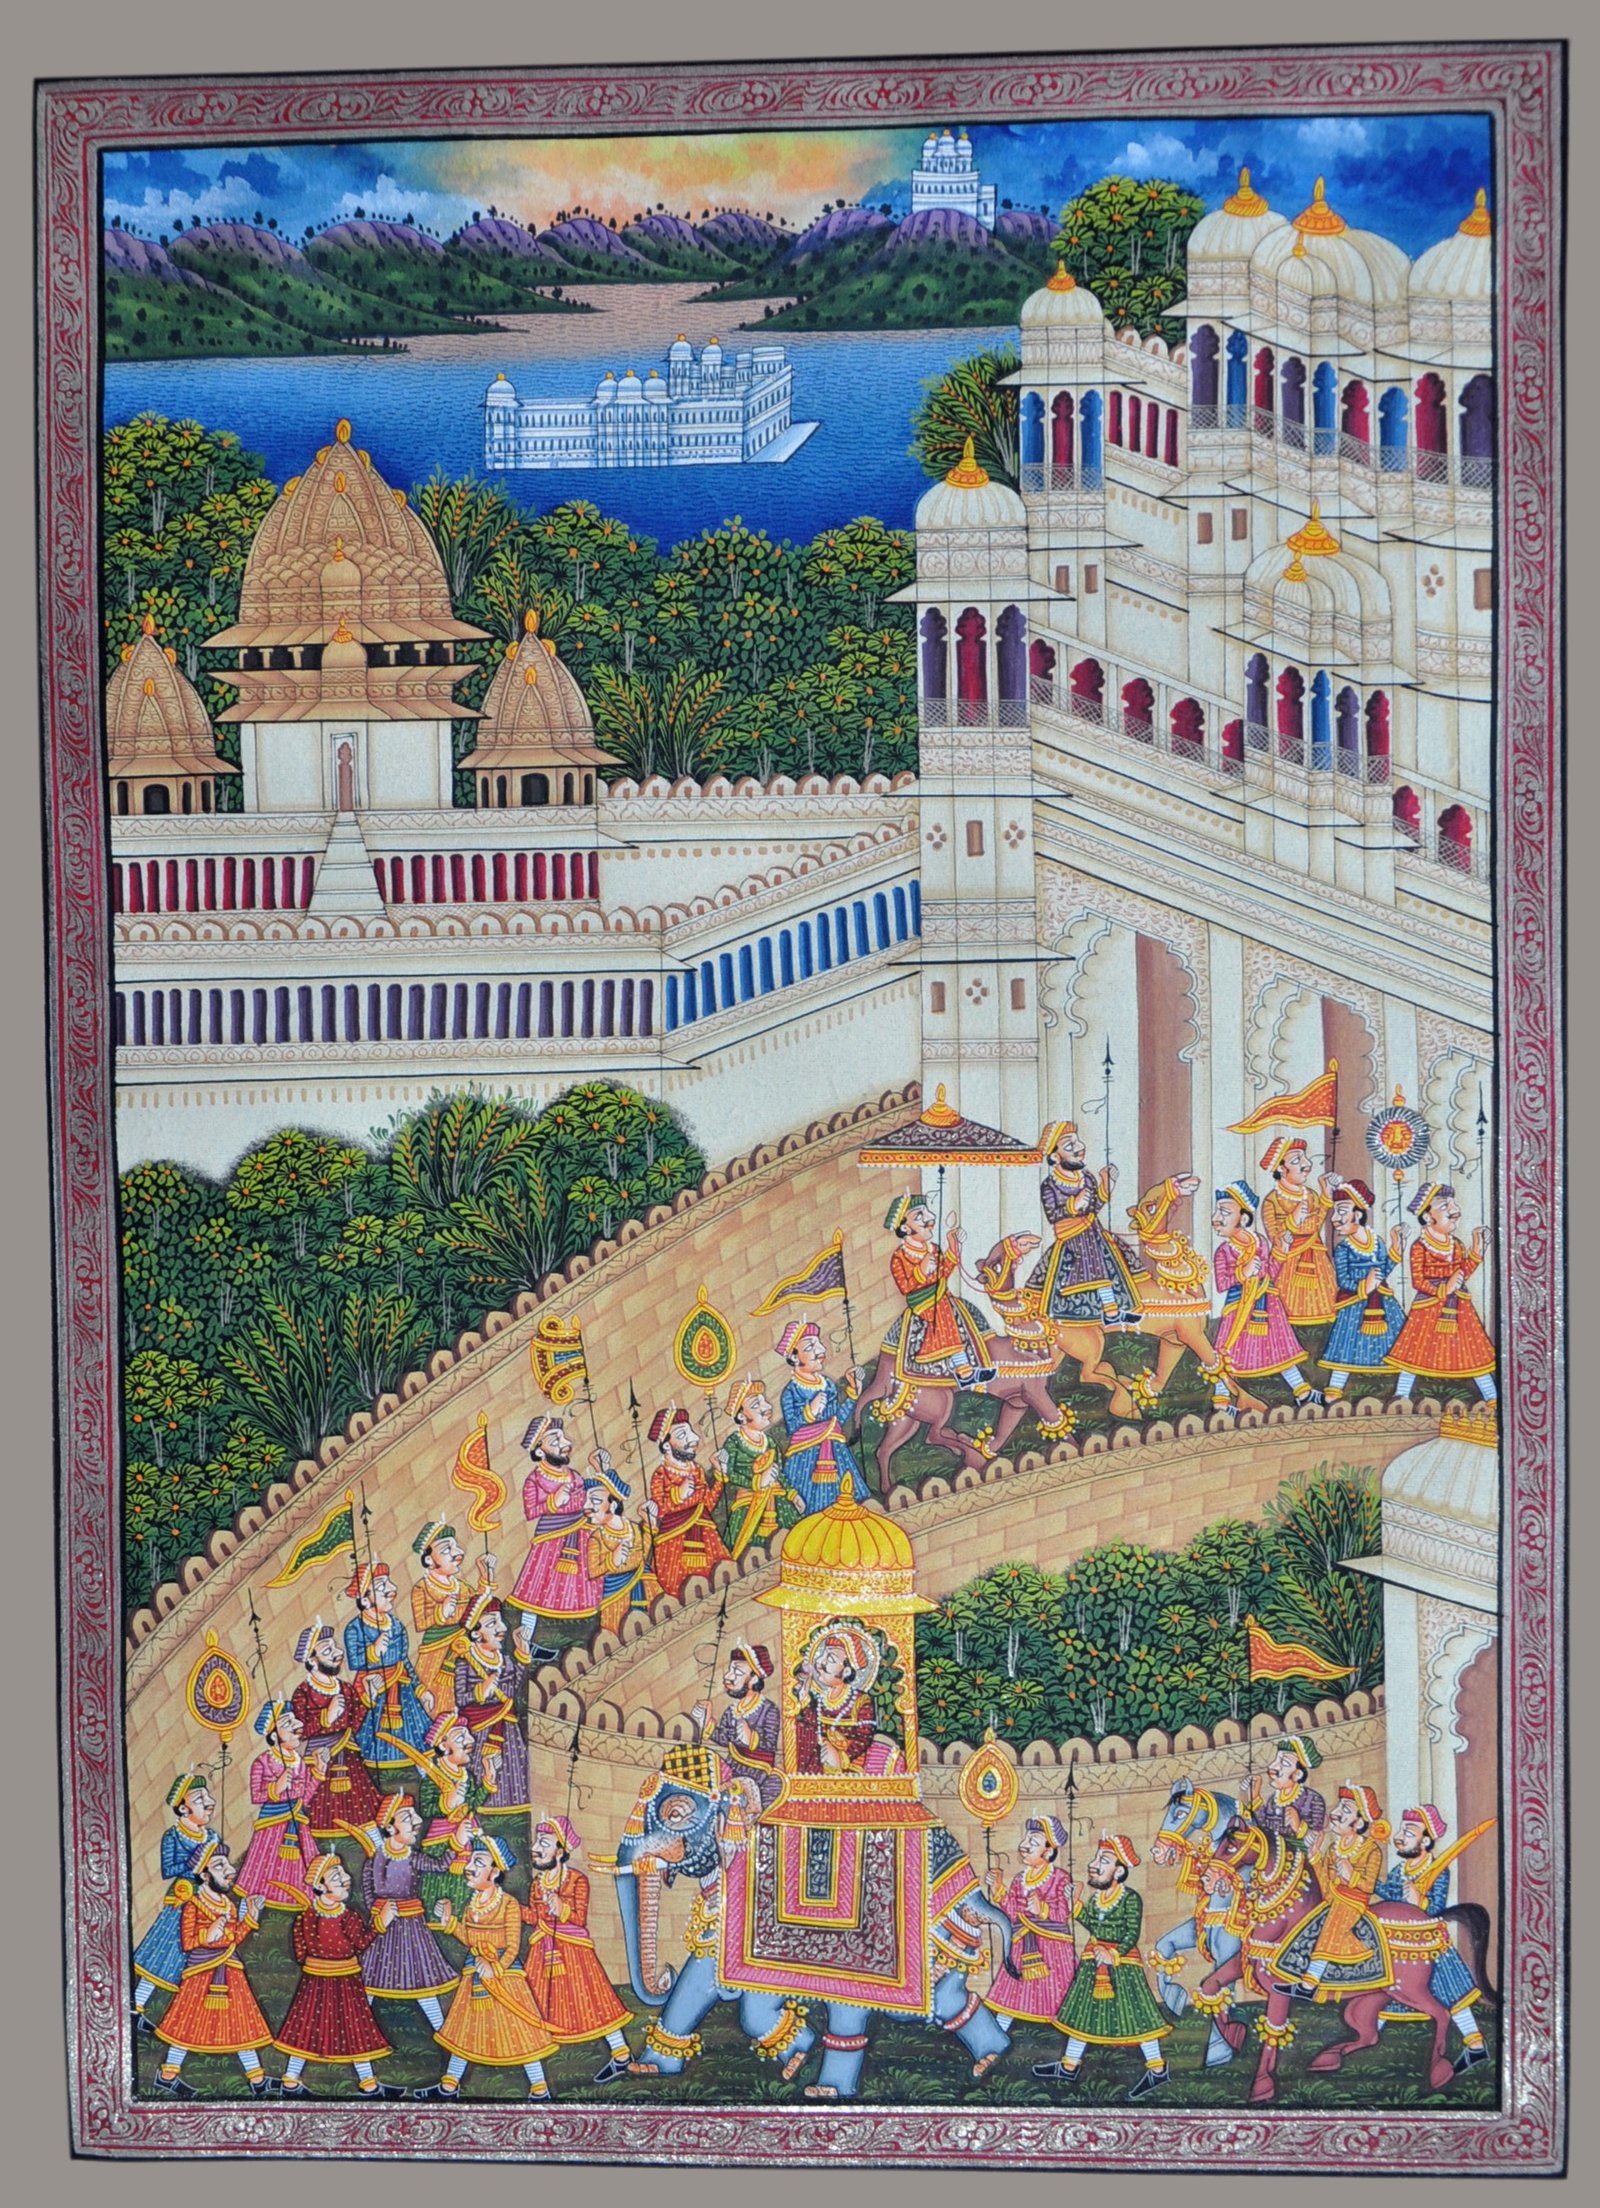 MINIATURE PAINTING ON SILK - KING PROCESSION